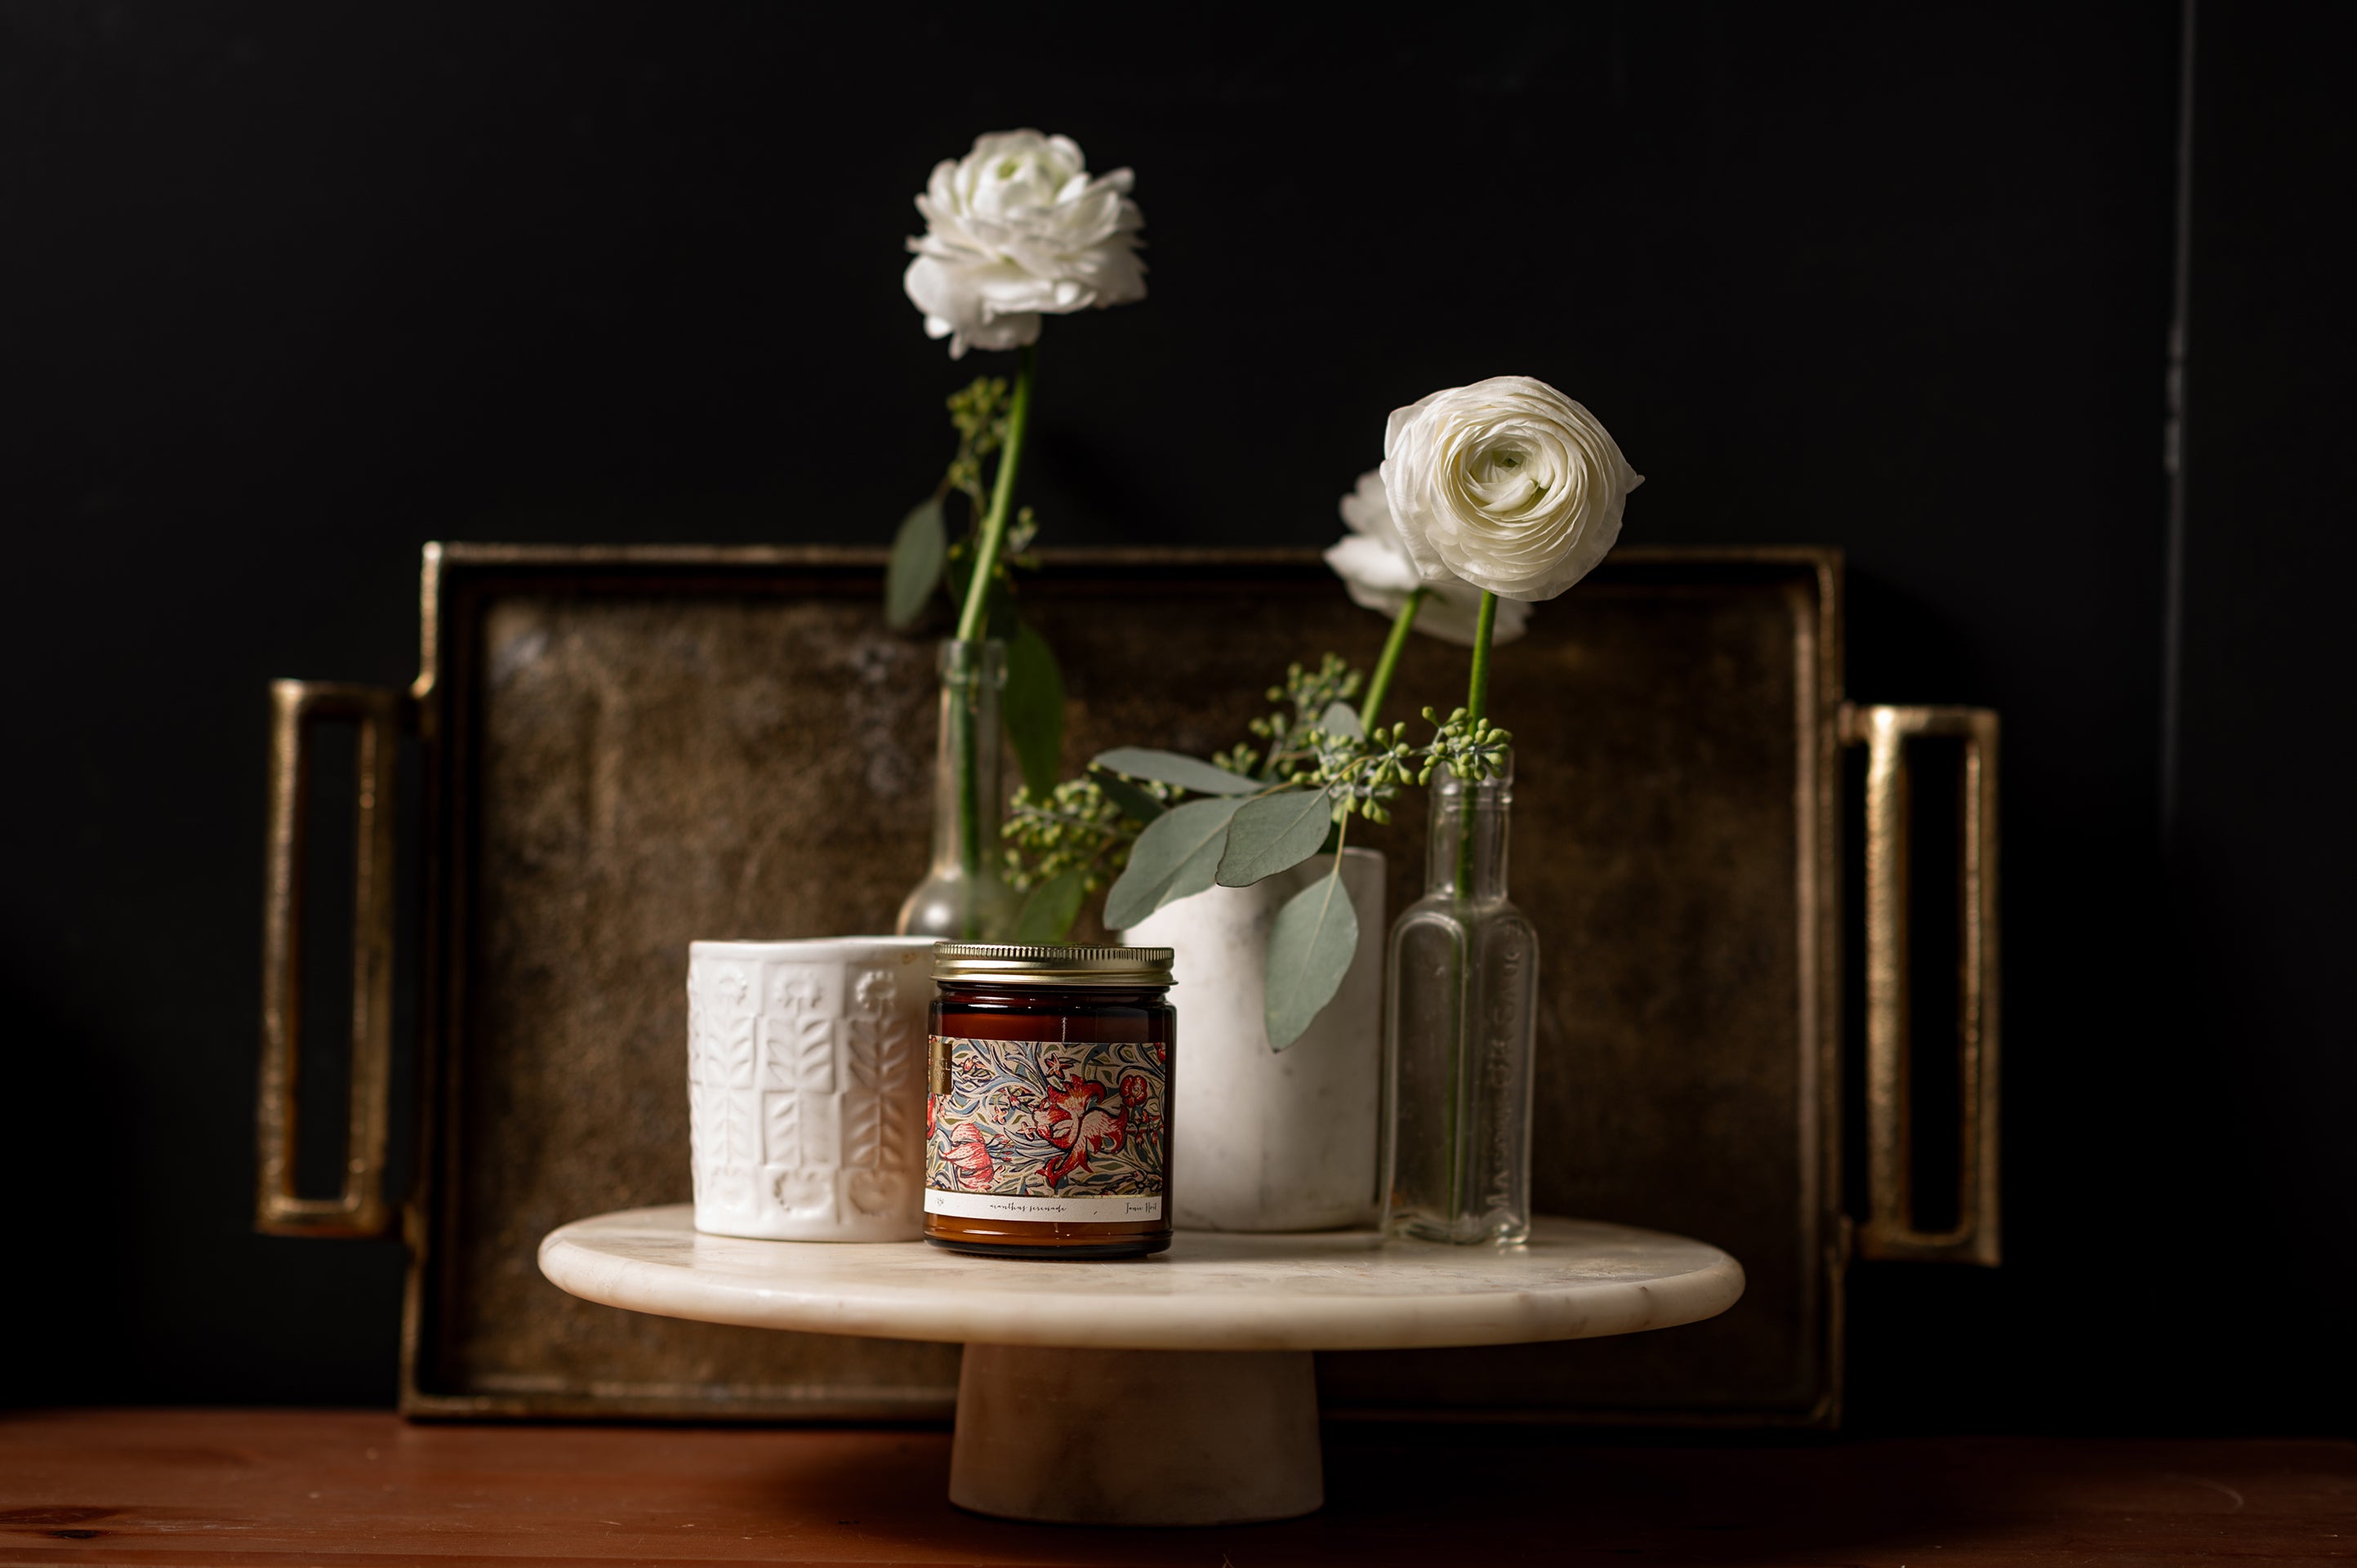 A candle in an amber glass jar with a original art piece featured on the label.